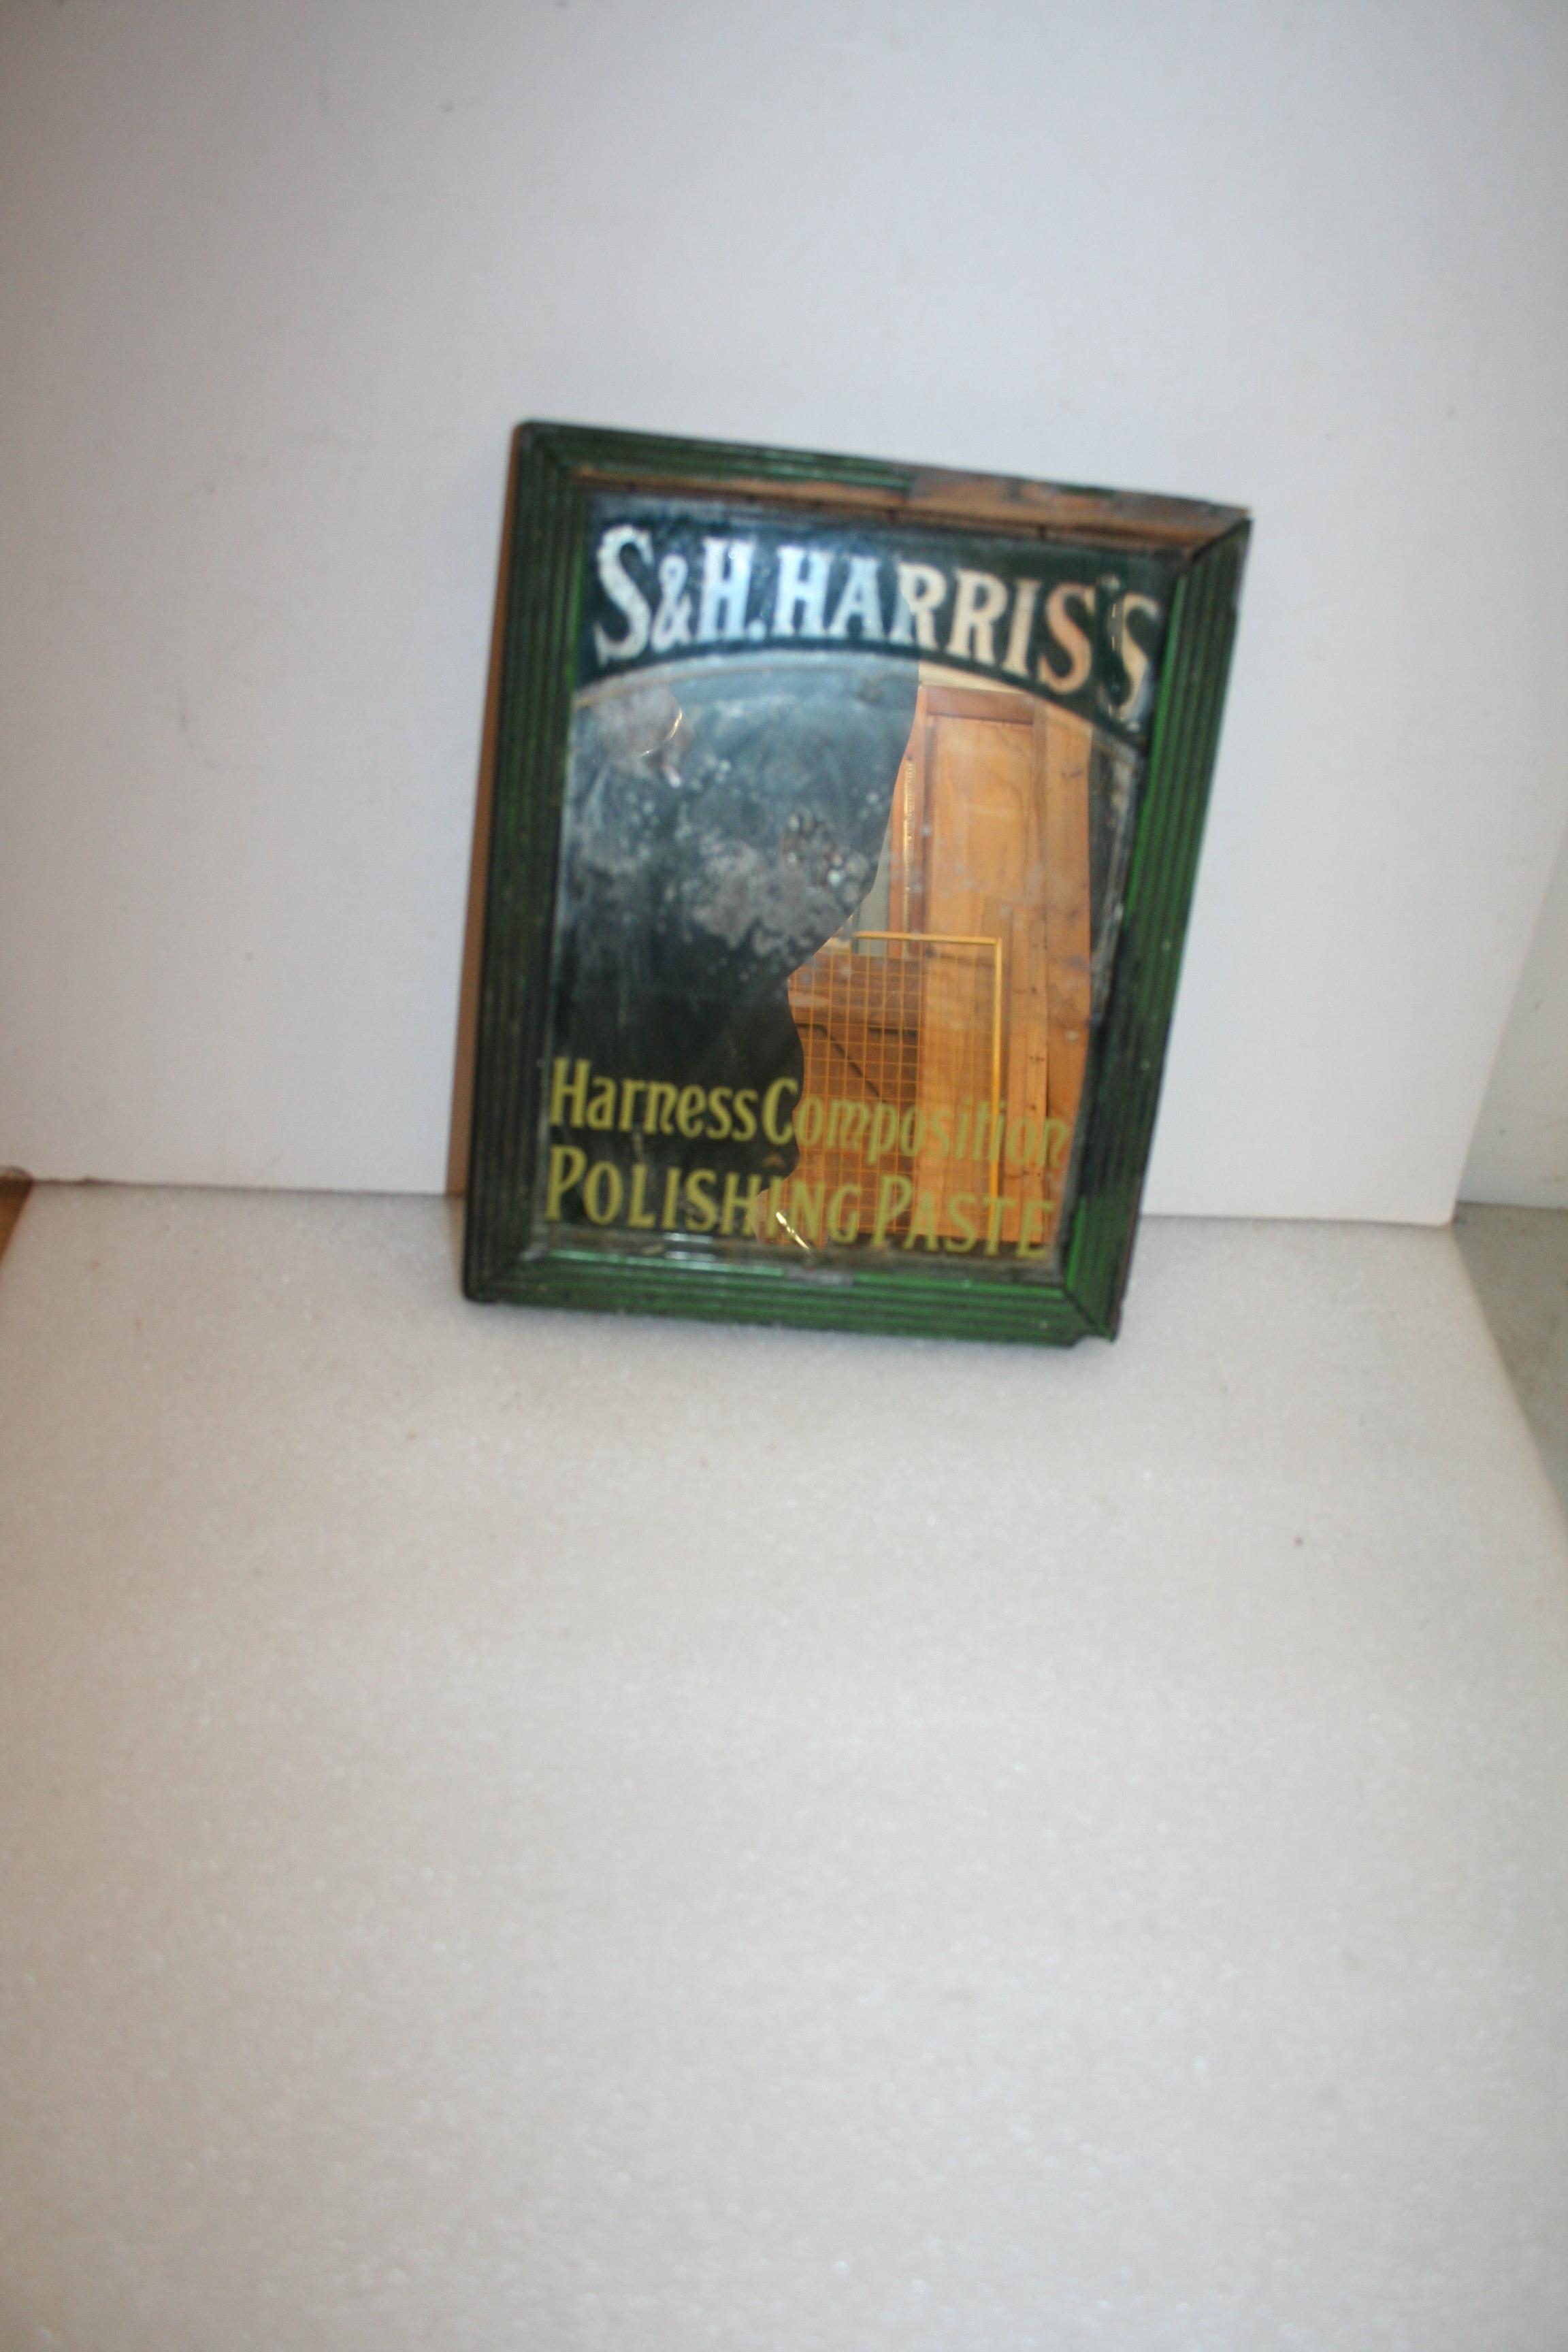 Advertising mirror for S & H Harris